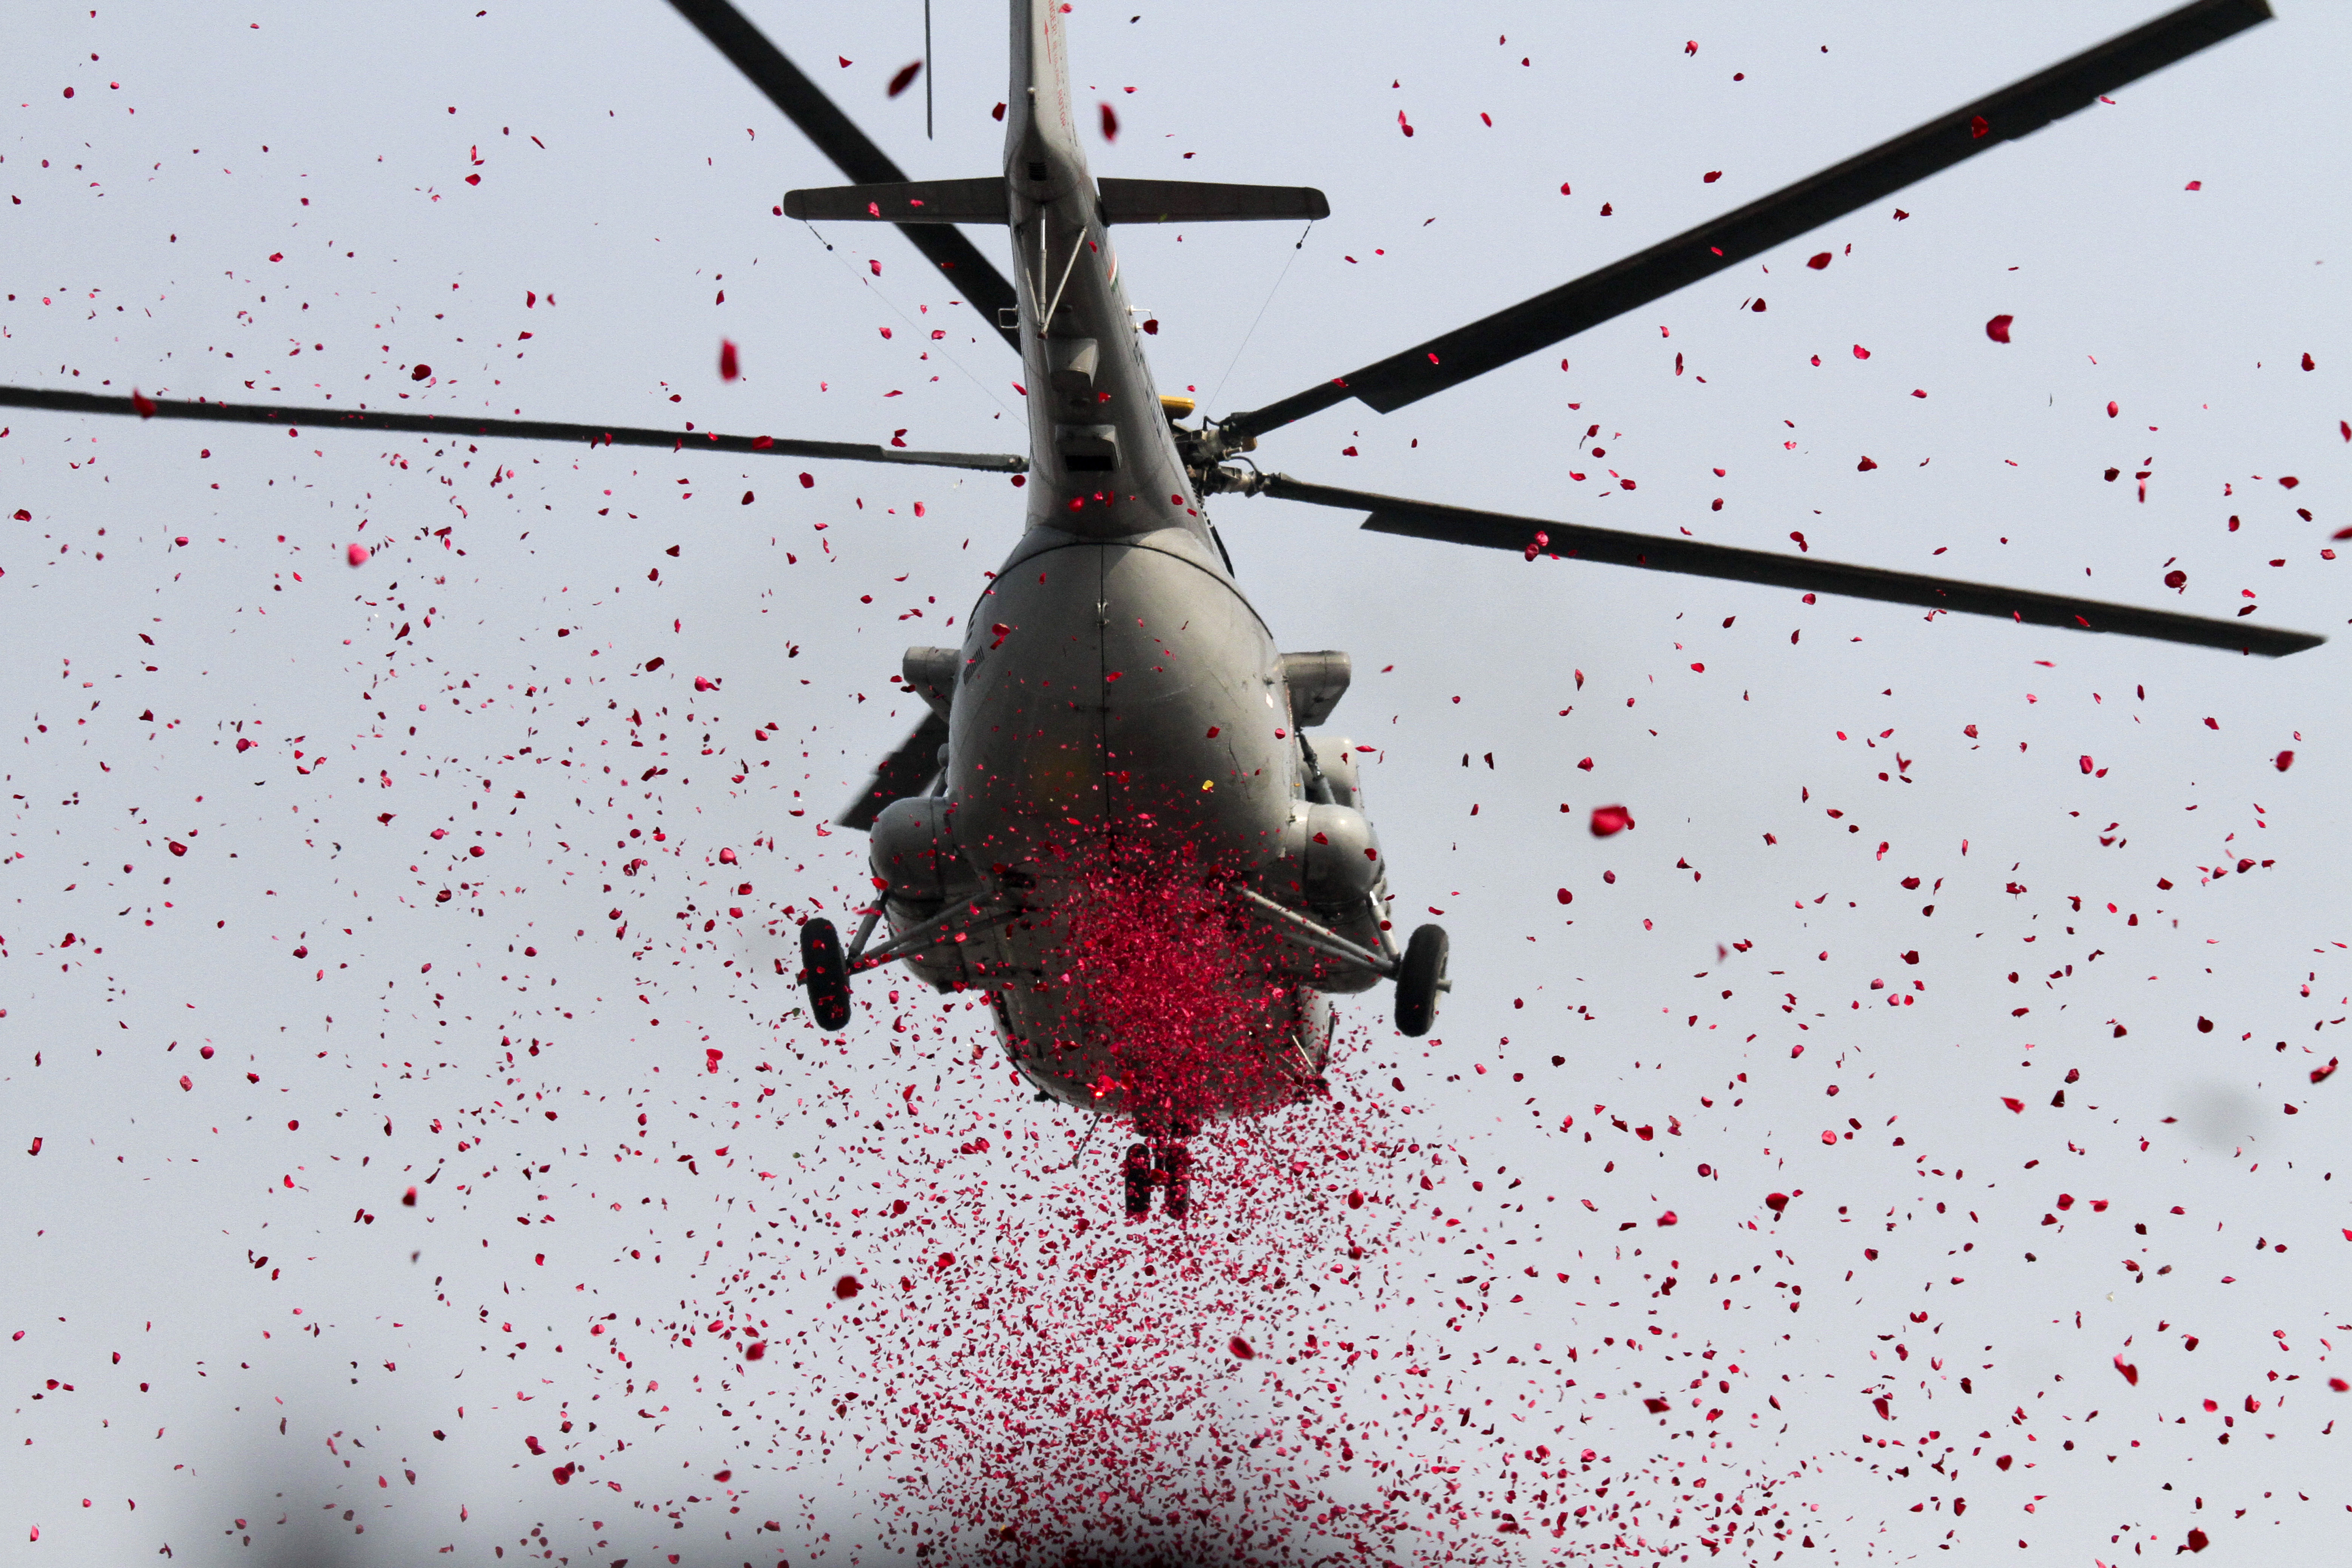 An Indian army helicopter showers flower petals over the Republic Day parade venue in Kolkata, India, Saturday, Jan. 26, 2019. India marks Republic Day on Jan. 26 with military parades across the country. (AP Photo/Bikas Das)